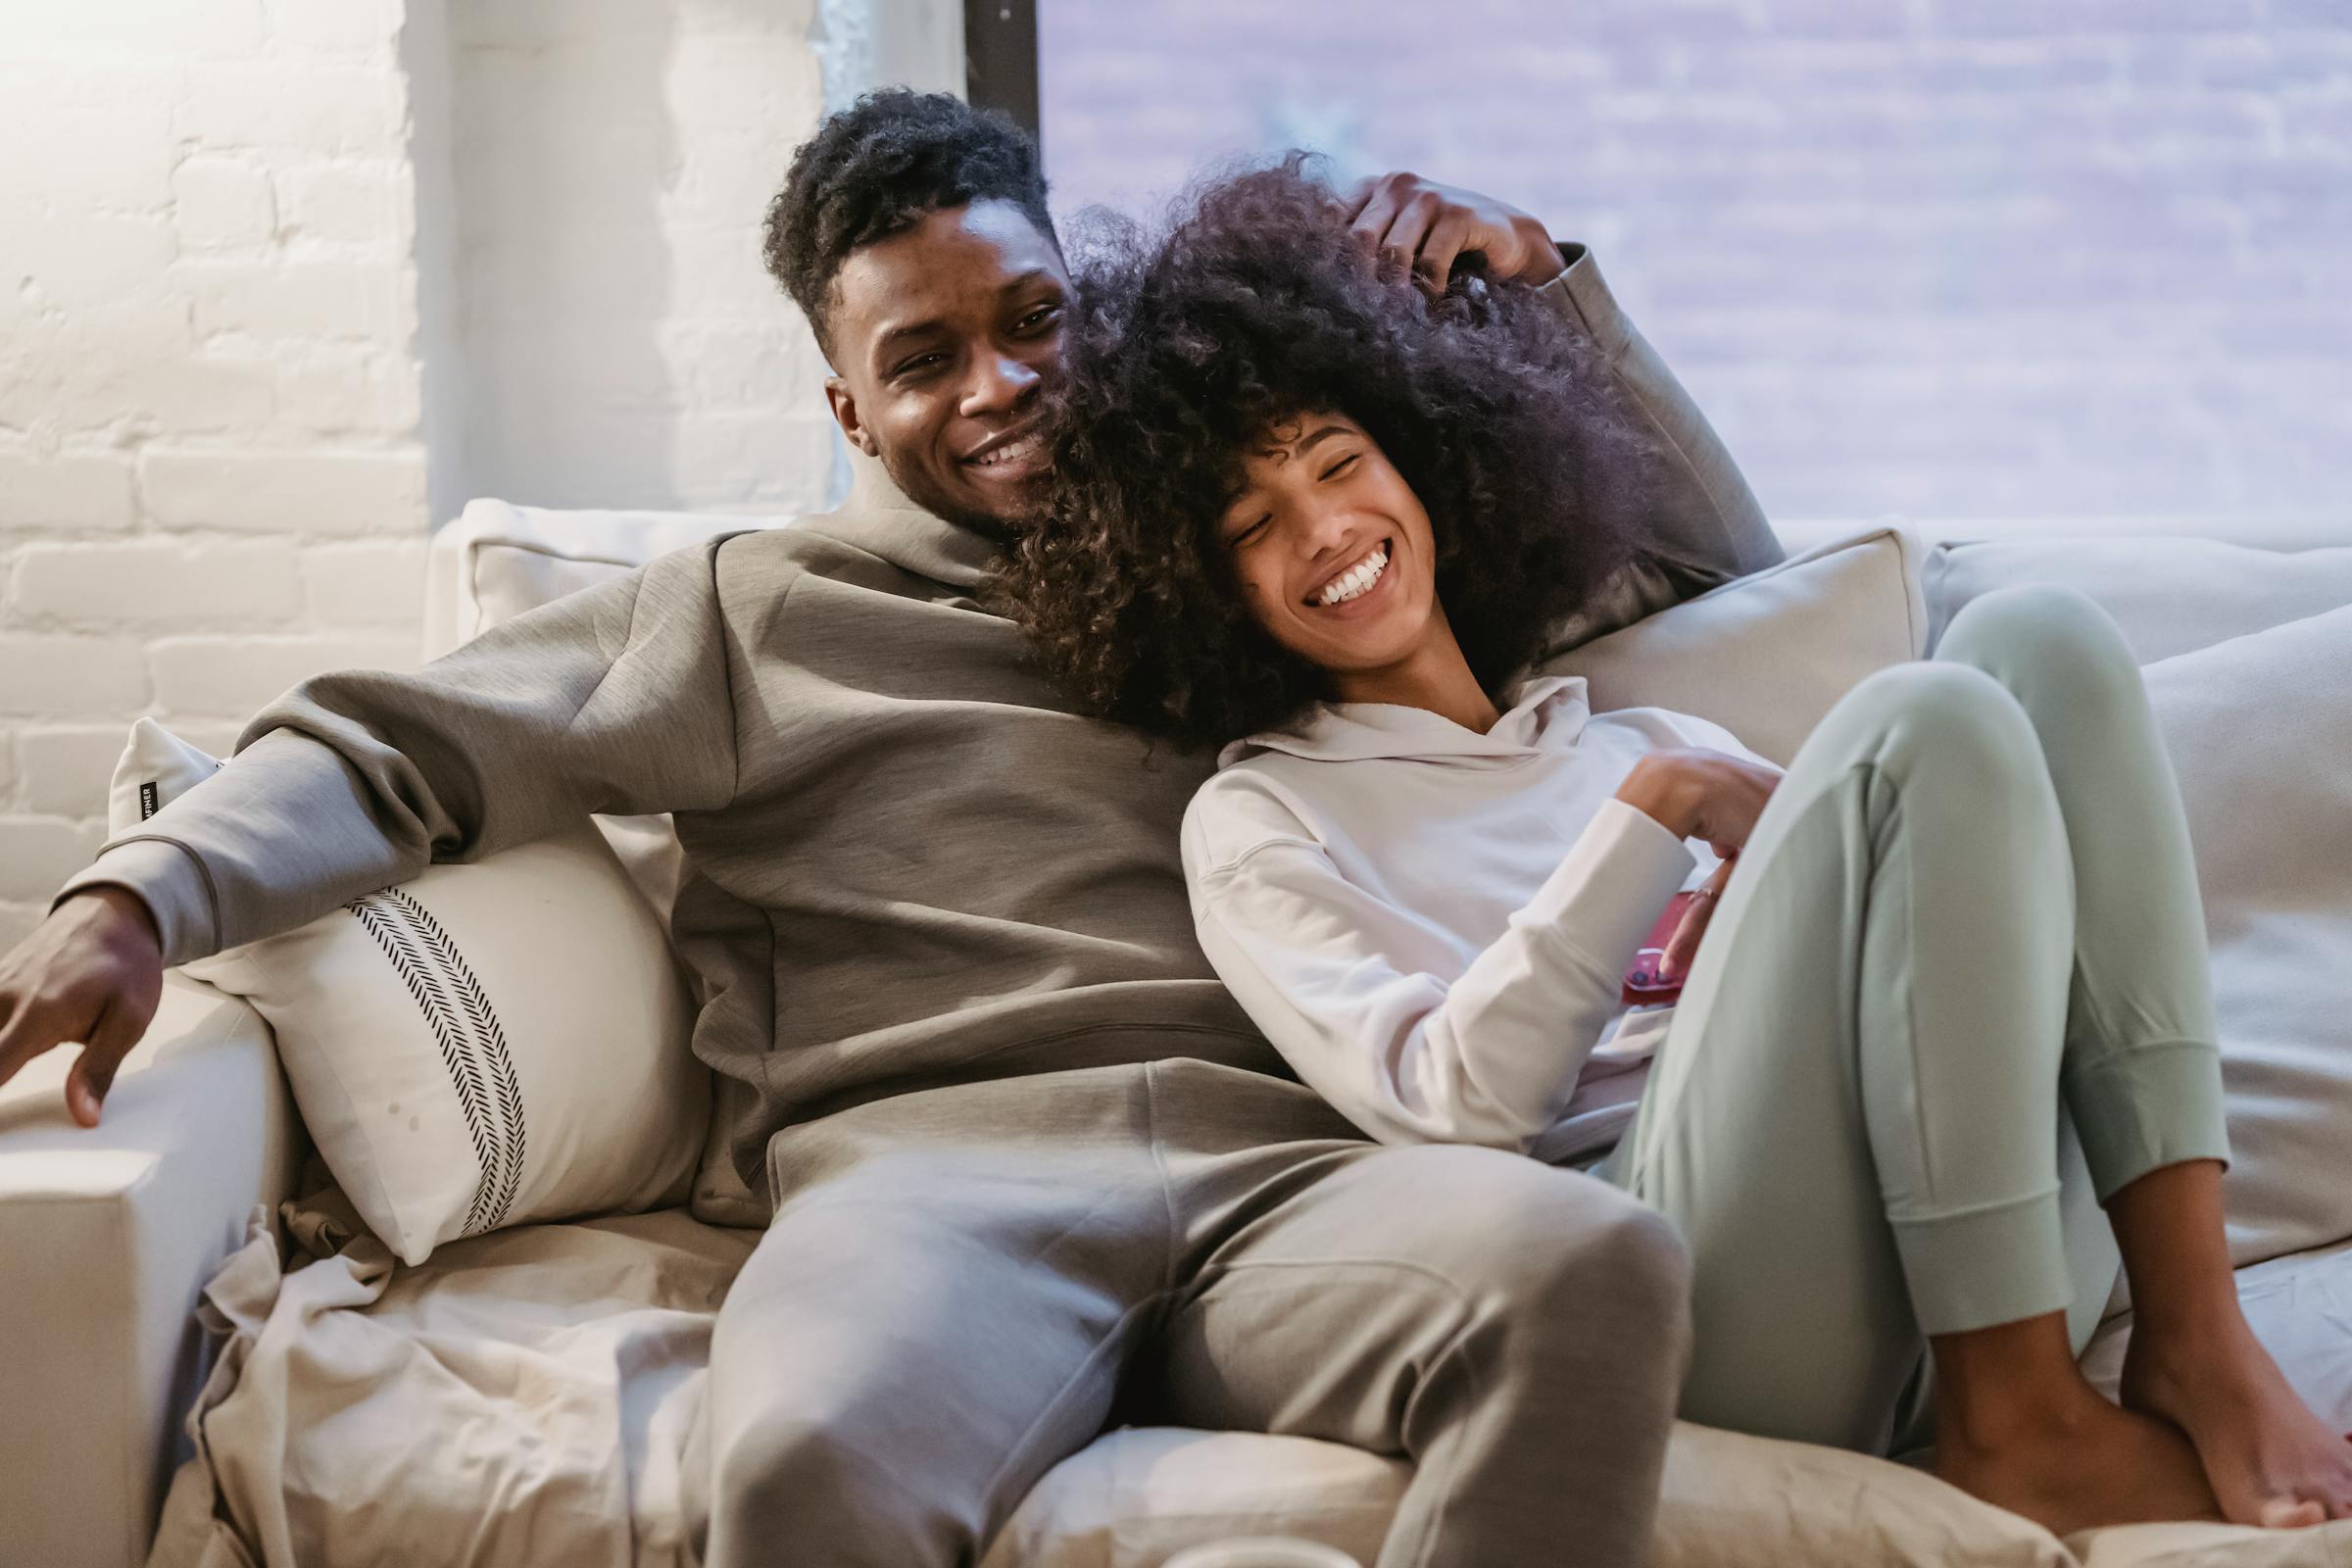 A couple on the couch | Source: Pexels